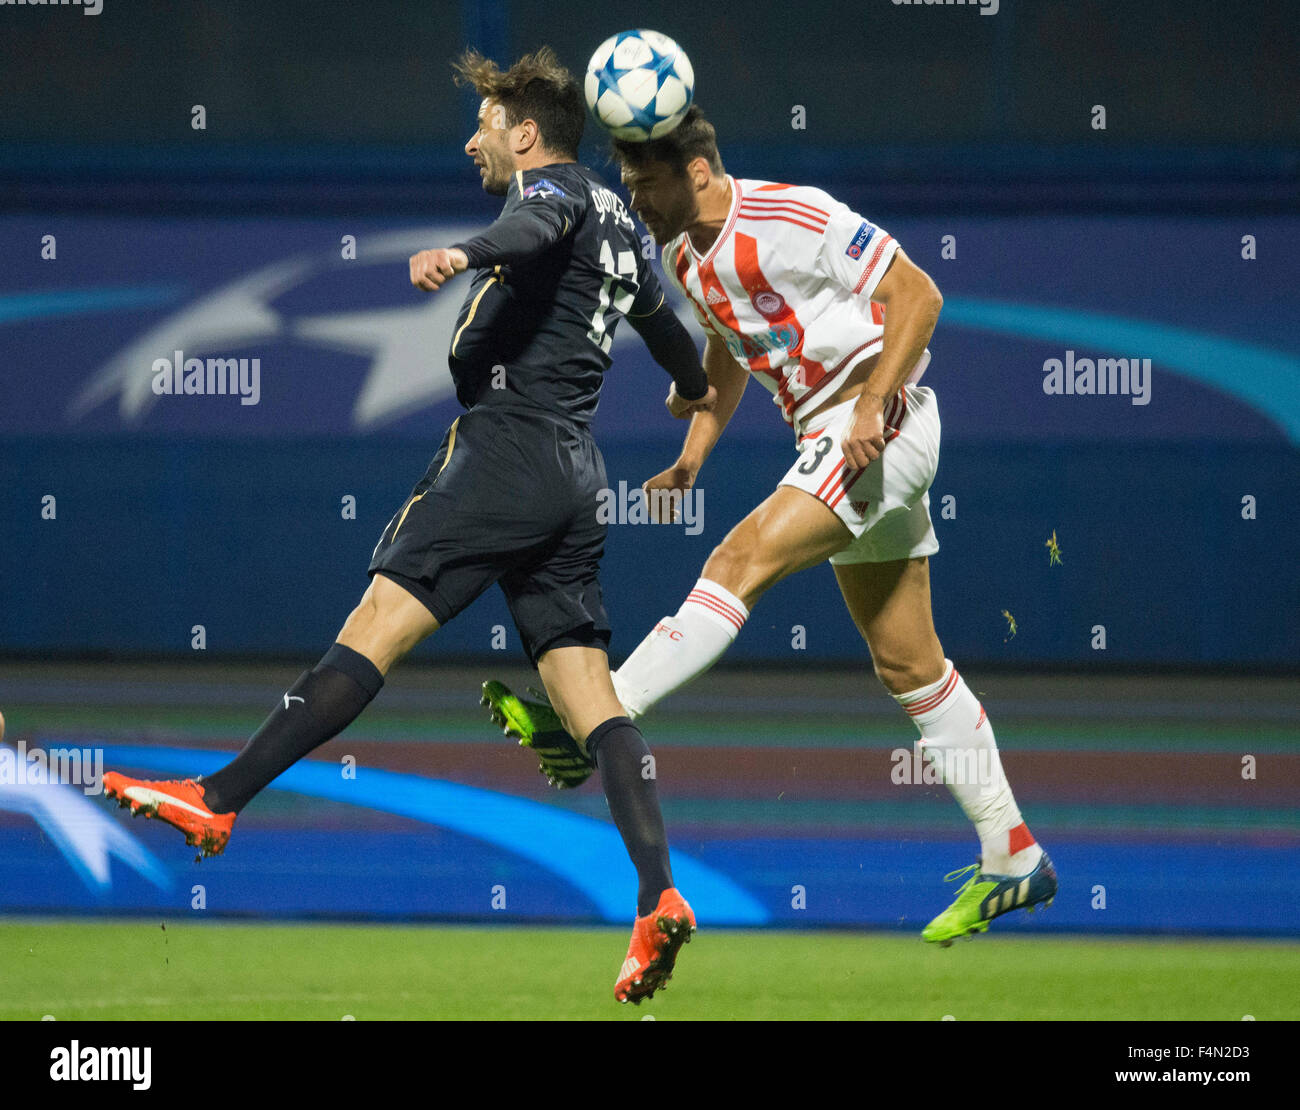 Zagreb, Croatia. 20th Oct, 2015. Alberto Botia (R) of Olympiacos vies with Goncalo Santos of Dinamo Zagreb during the UEFA Champions League Group F football match at Maksimir stadium in Zagreb, Croatia, on Oct. 20, 2015. Olympiacos won 1-0. Credit:  Miso Lisanin/Xinhua/Alamy Live News Stock Photo